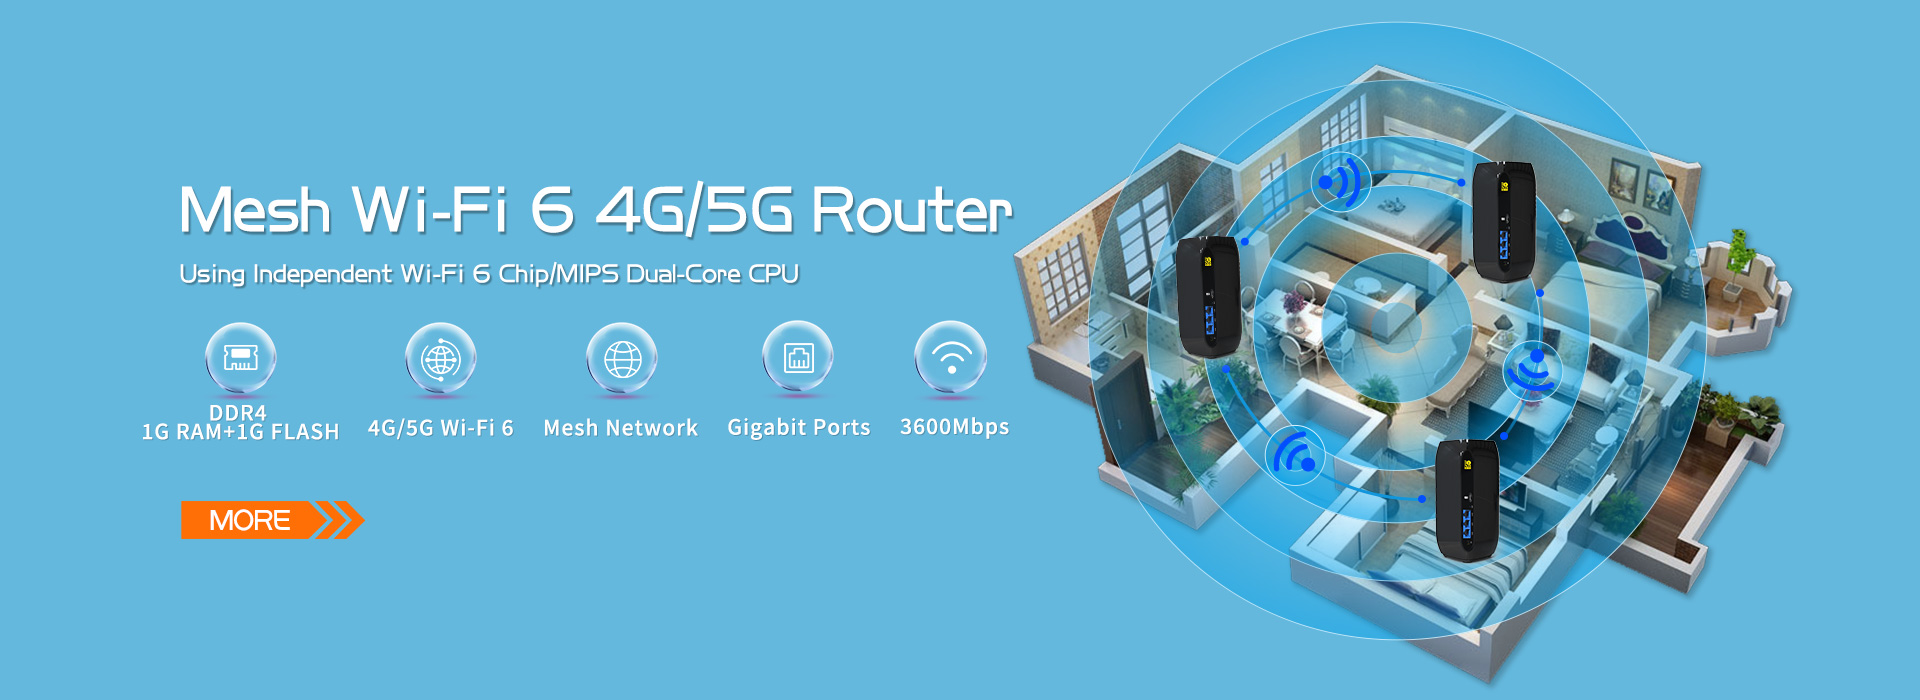 Wifi 6 5G Router